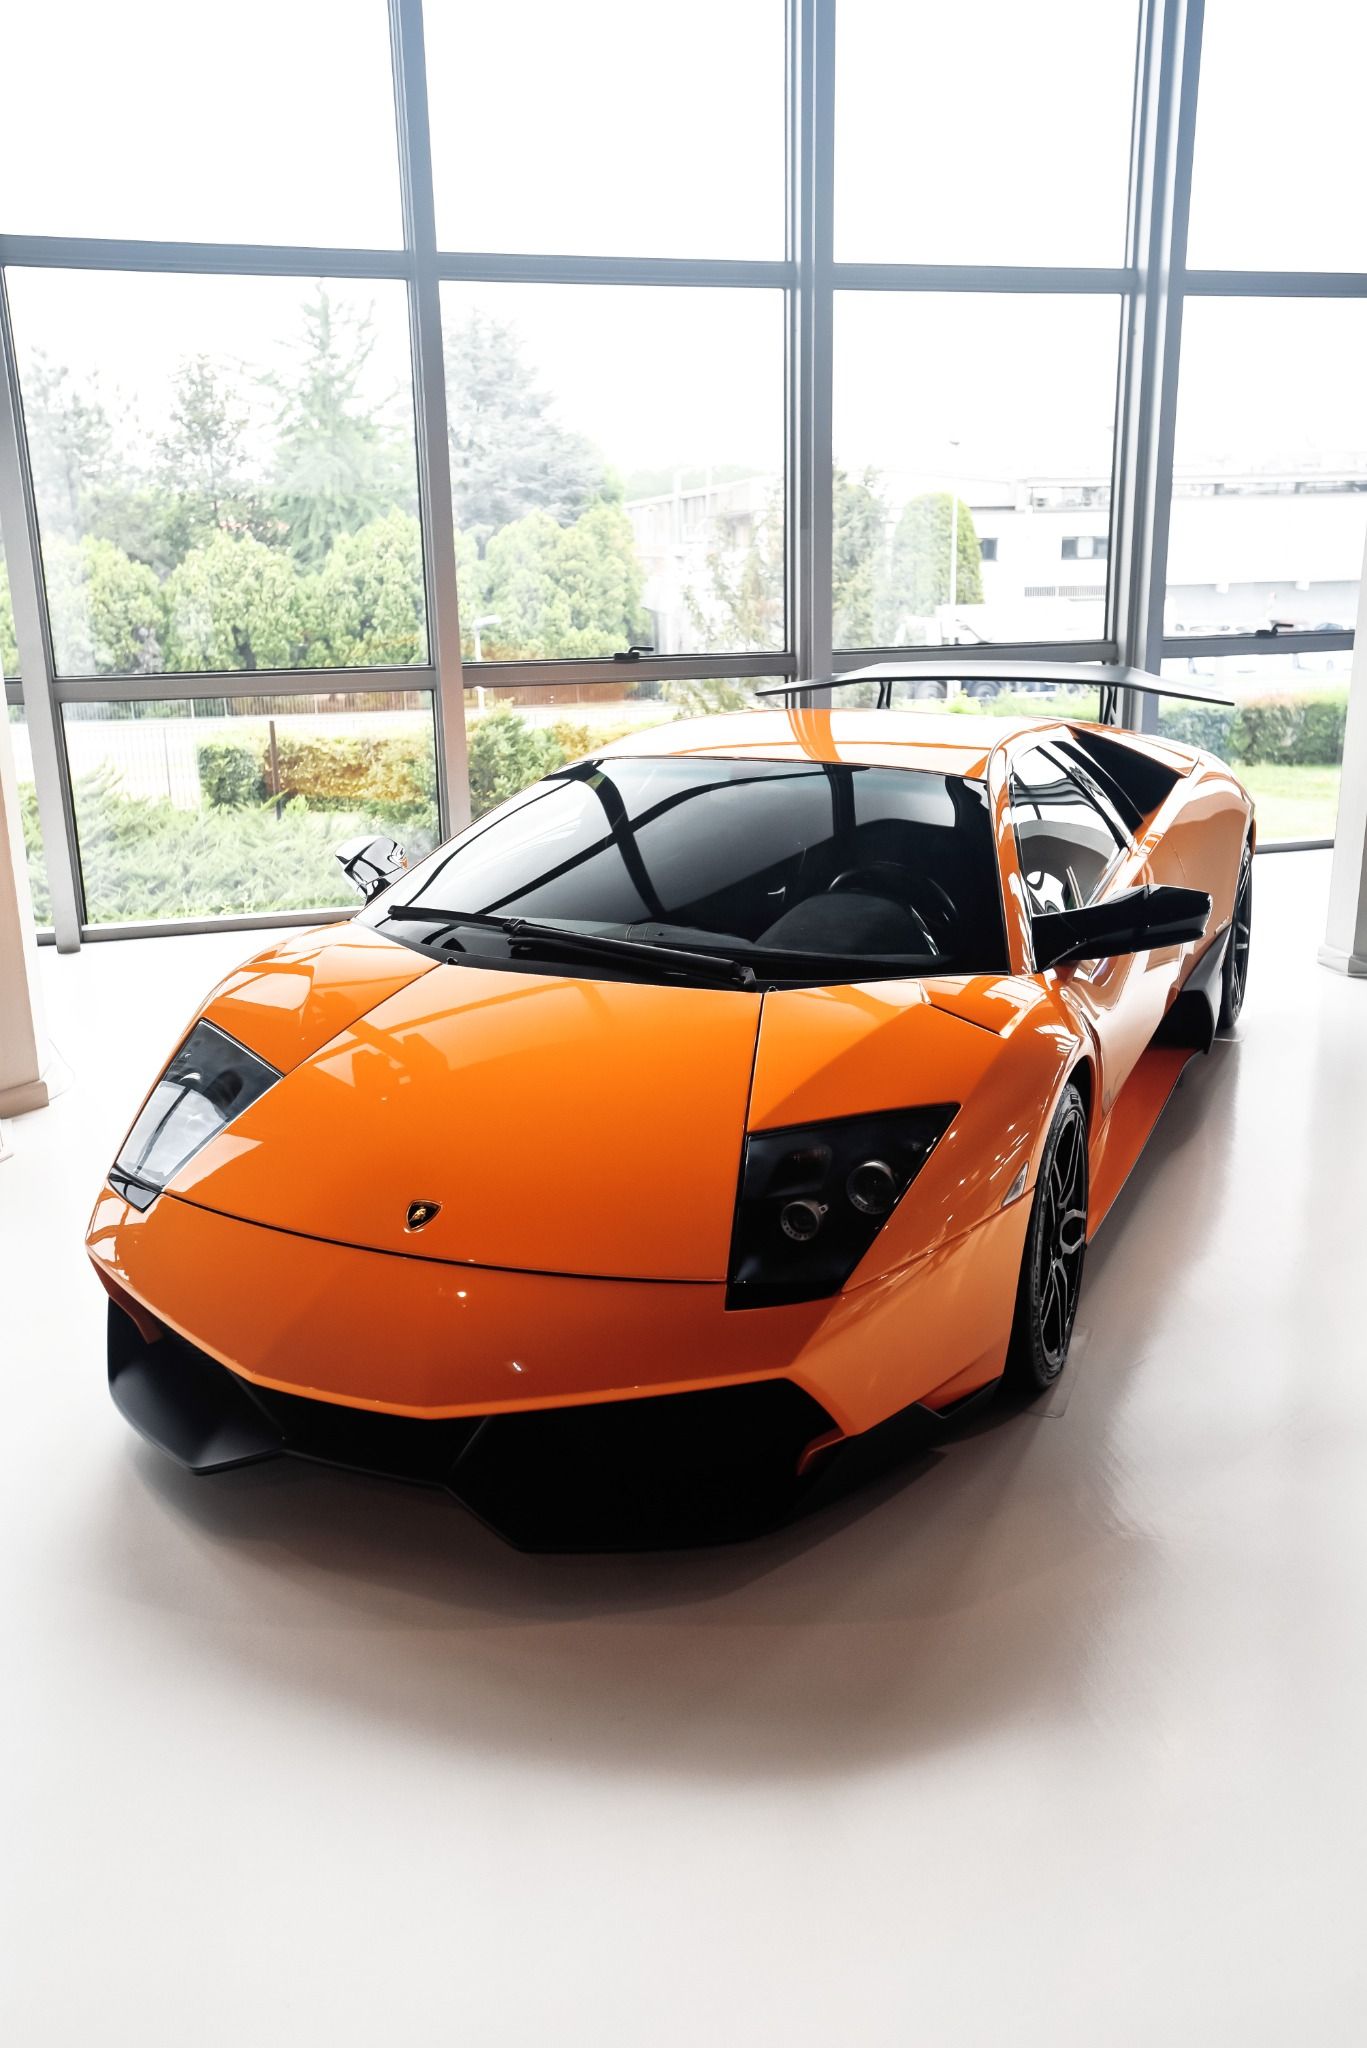 Front view of a yellow lamborghini in front of a big window